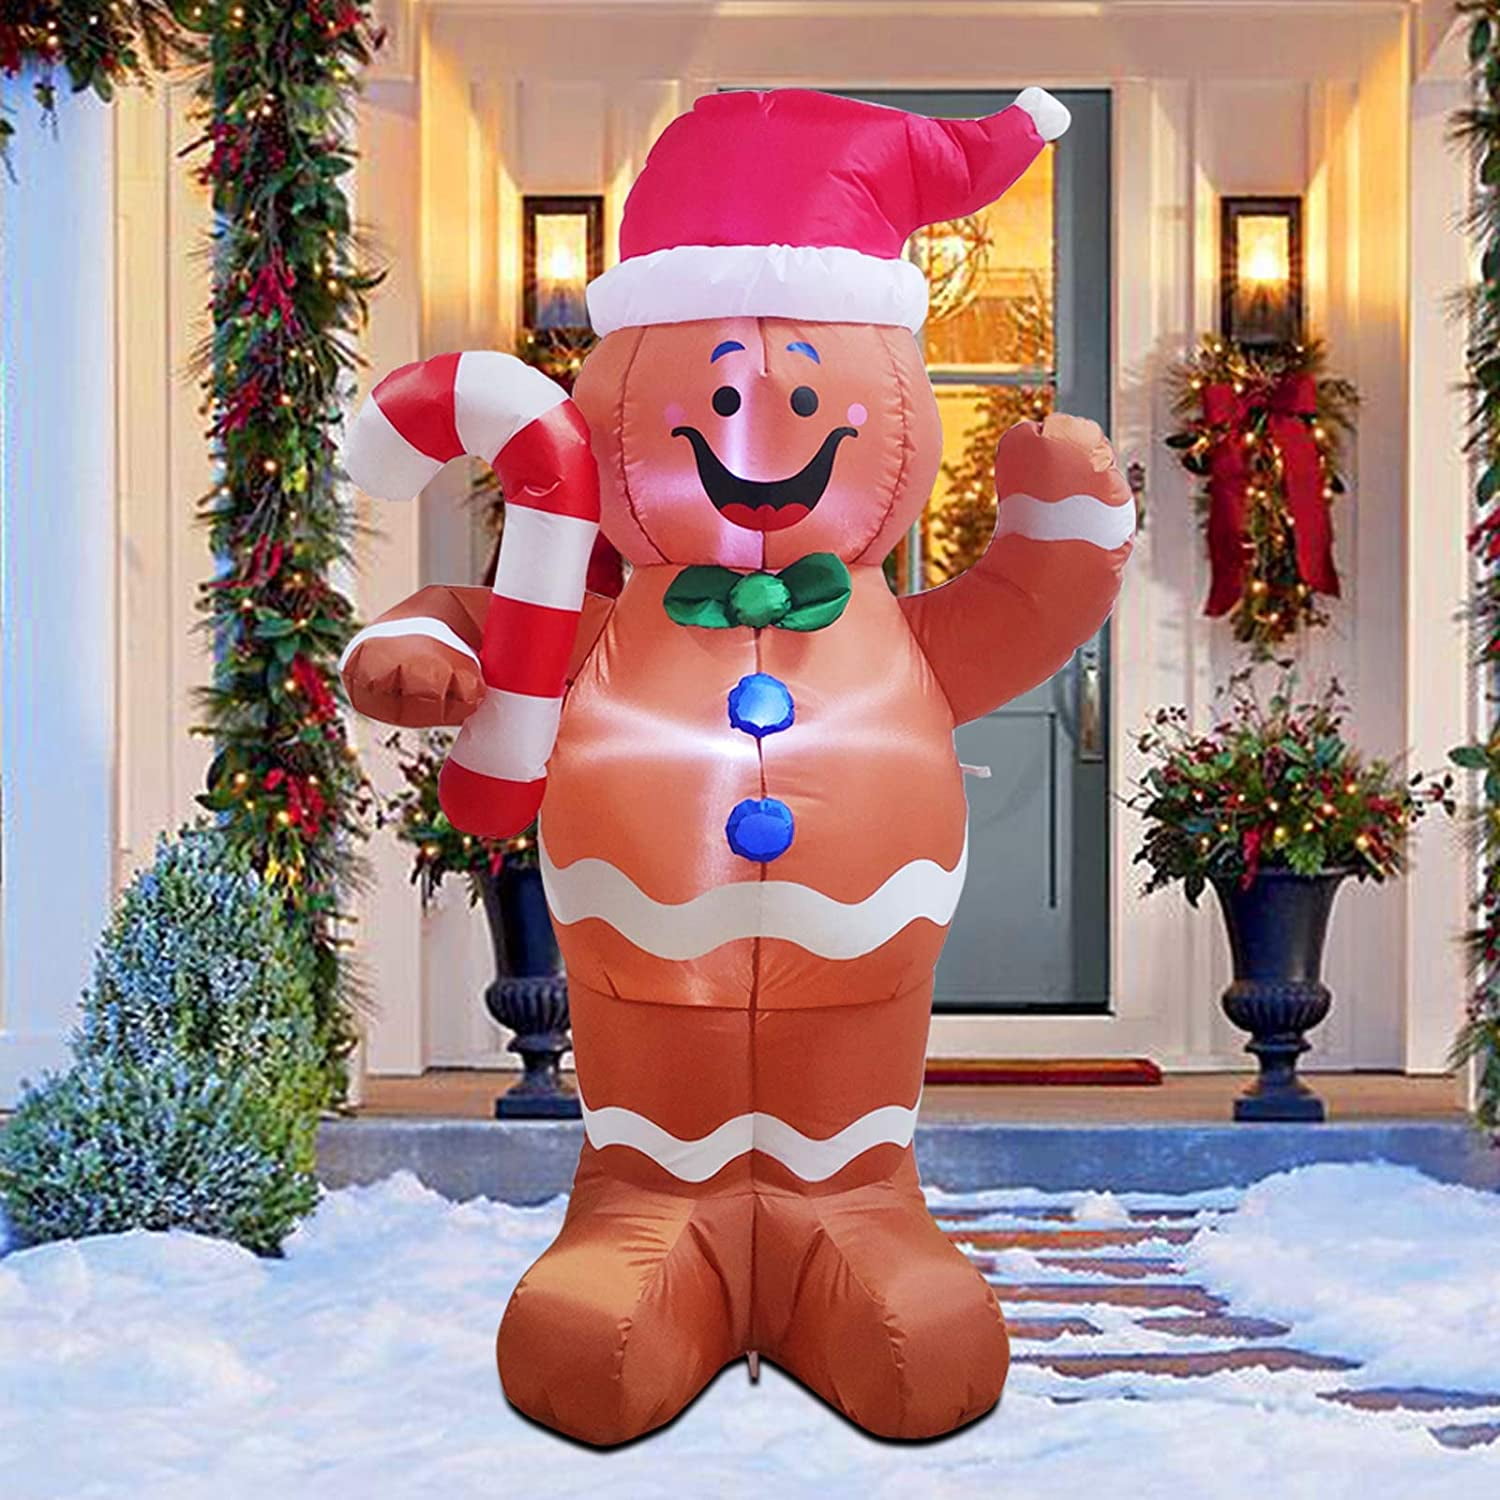 Outdoor 5 Foot Christmas Inflatable Decoration Snowman Xmas Lighted Yard Lawn 